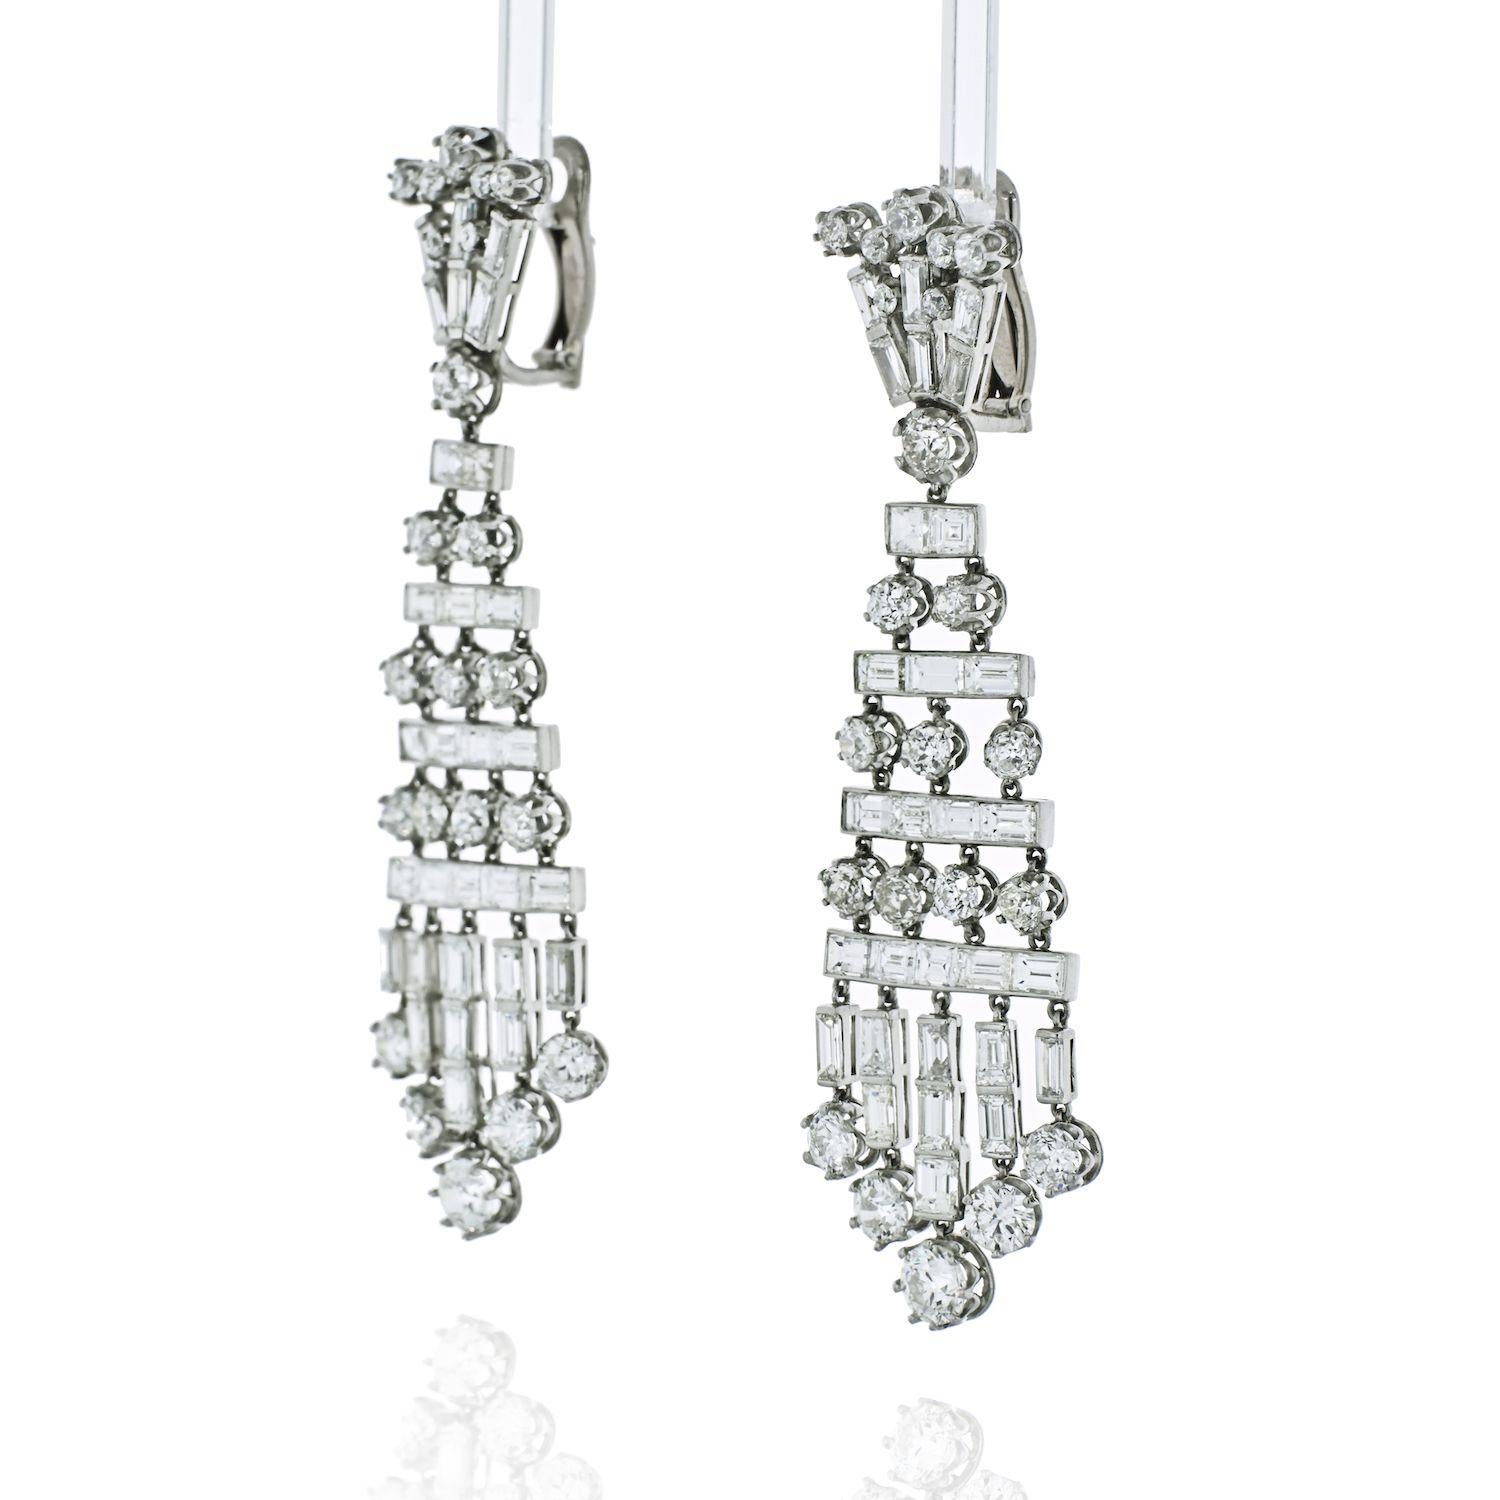 A magnificent pair of 26.50 carat diamond chandelier earrings. The earrings are comprised of old cut and baguette shaped diamonds weighing approximately 26.50 carats. The diamonds are G-H color and VS-SI clarity . These dramatic earrings exemplify